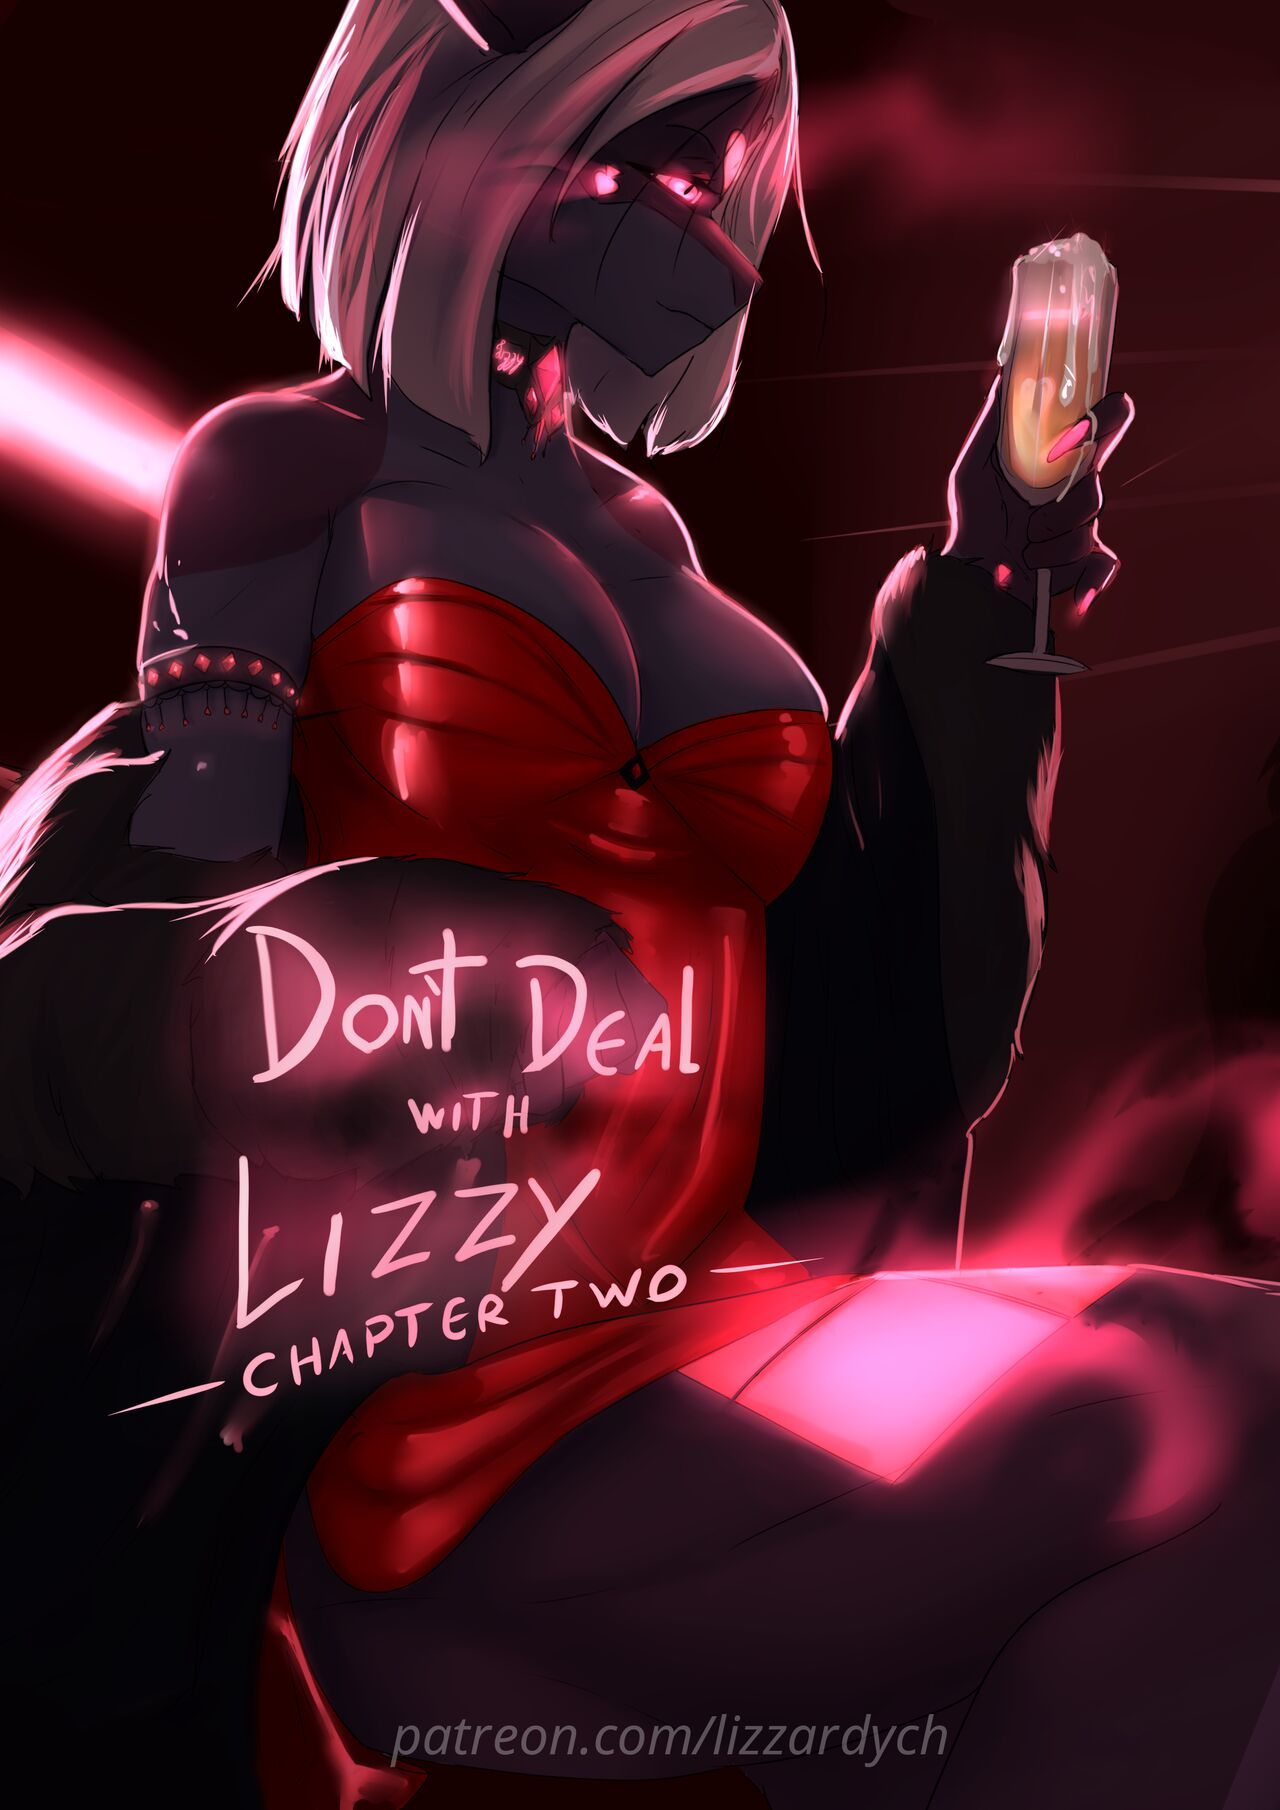 LizzardYch] Don't Deal With Lizzy Part 2 â€¢ Free Porn Comics